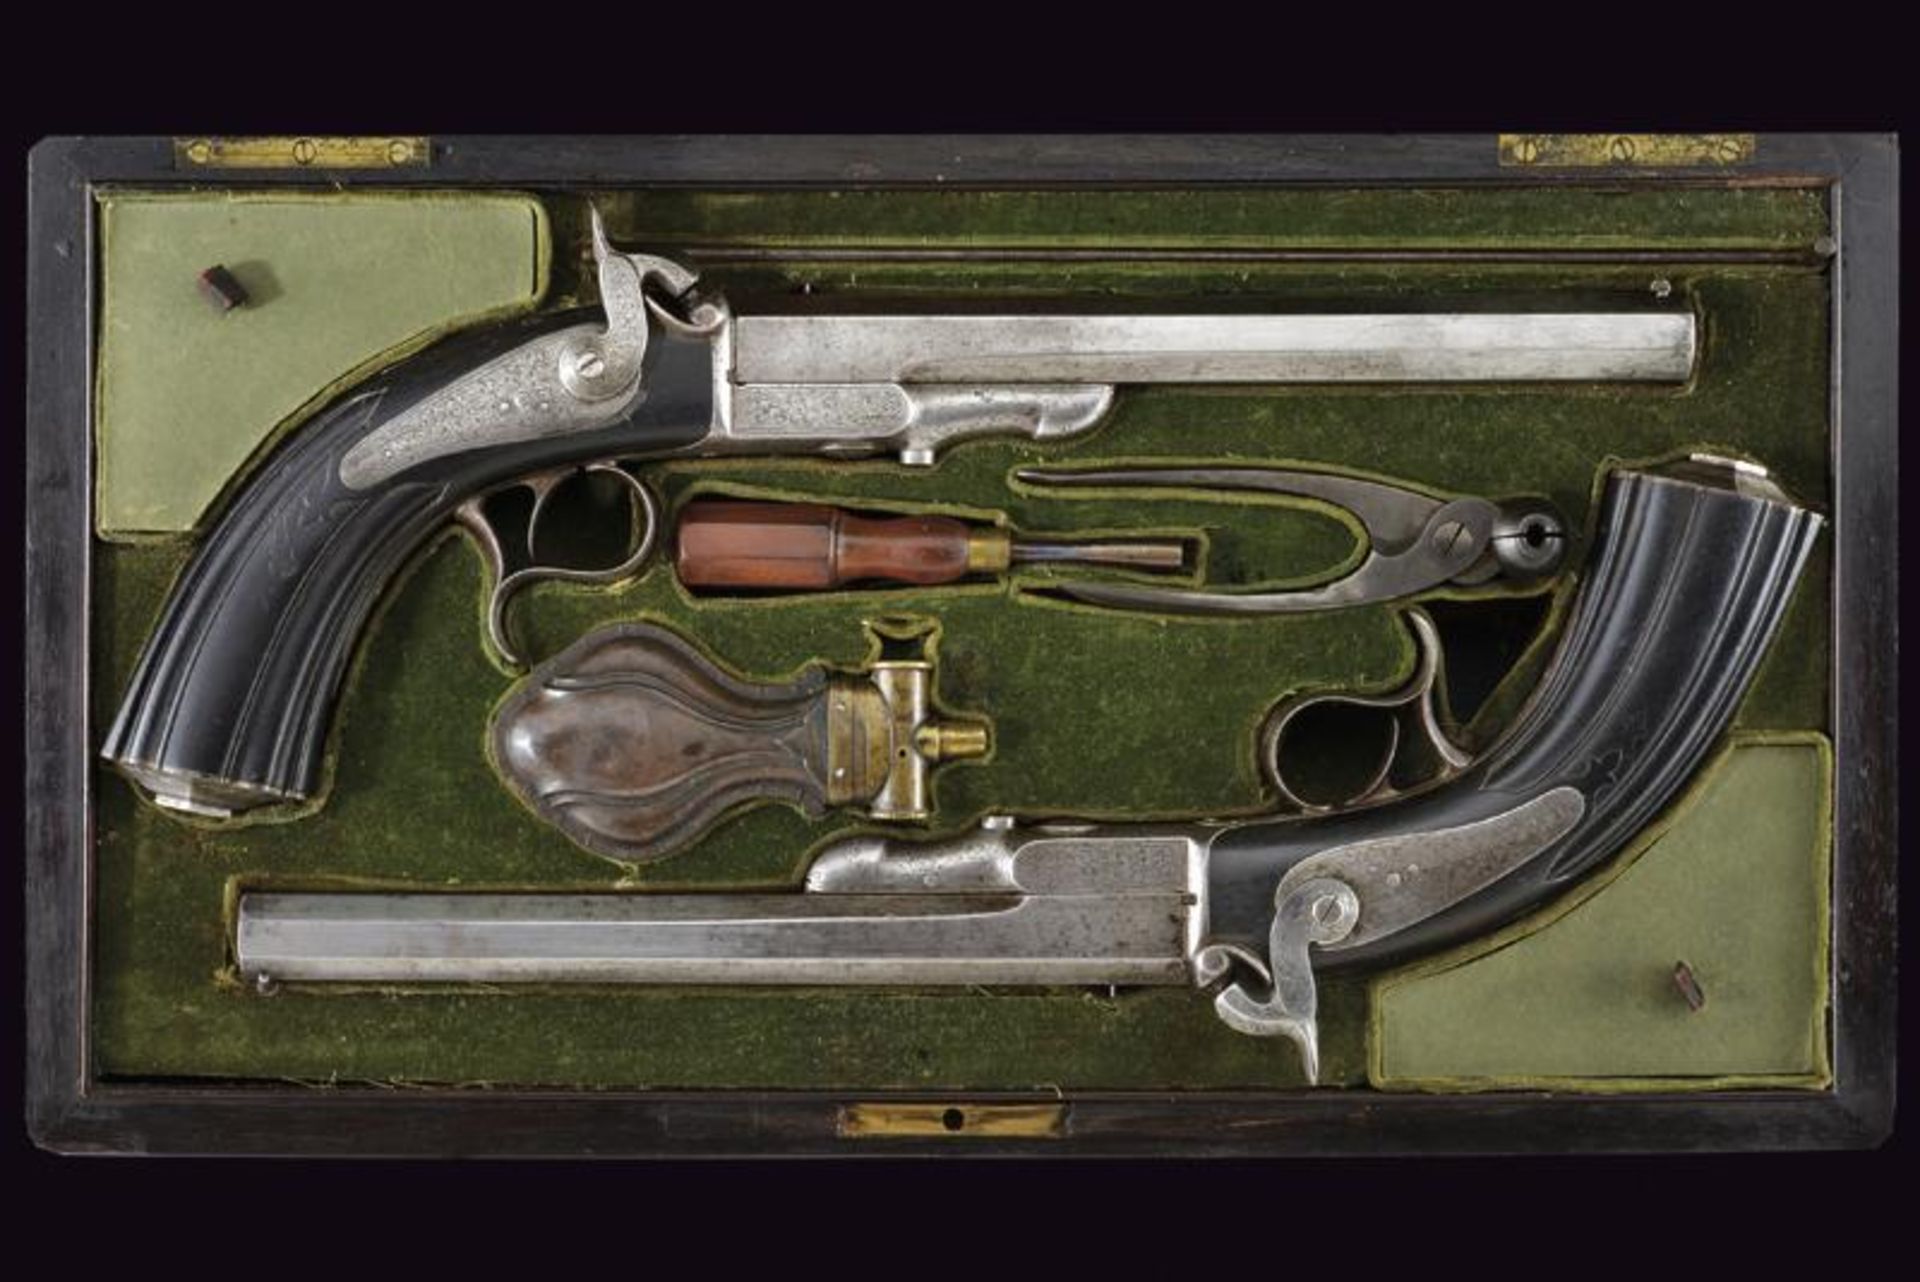 An interesting and rare pair of cased percussion pistols by Lepage